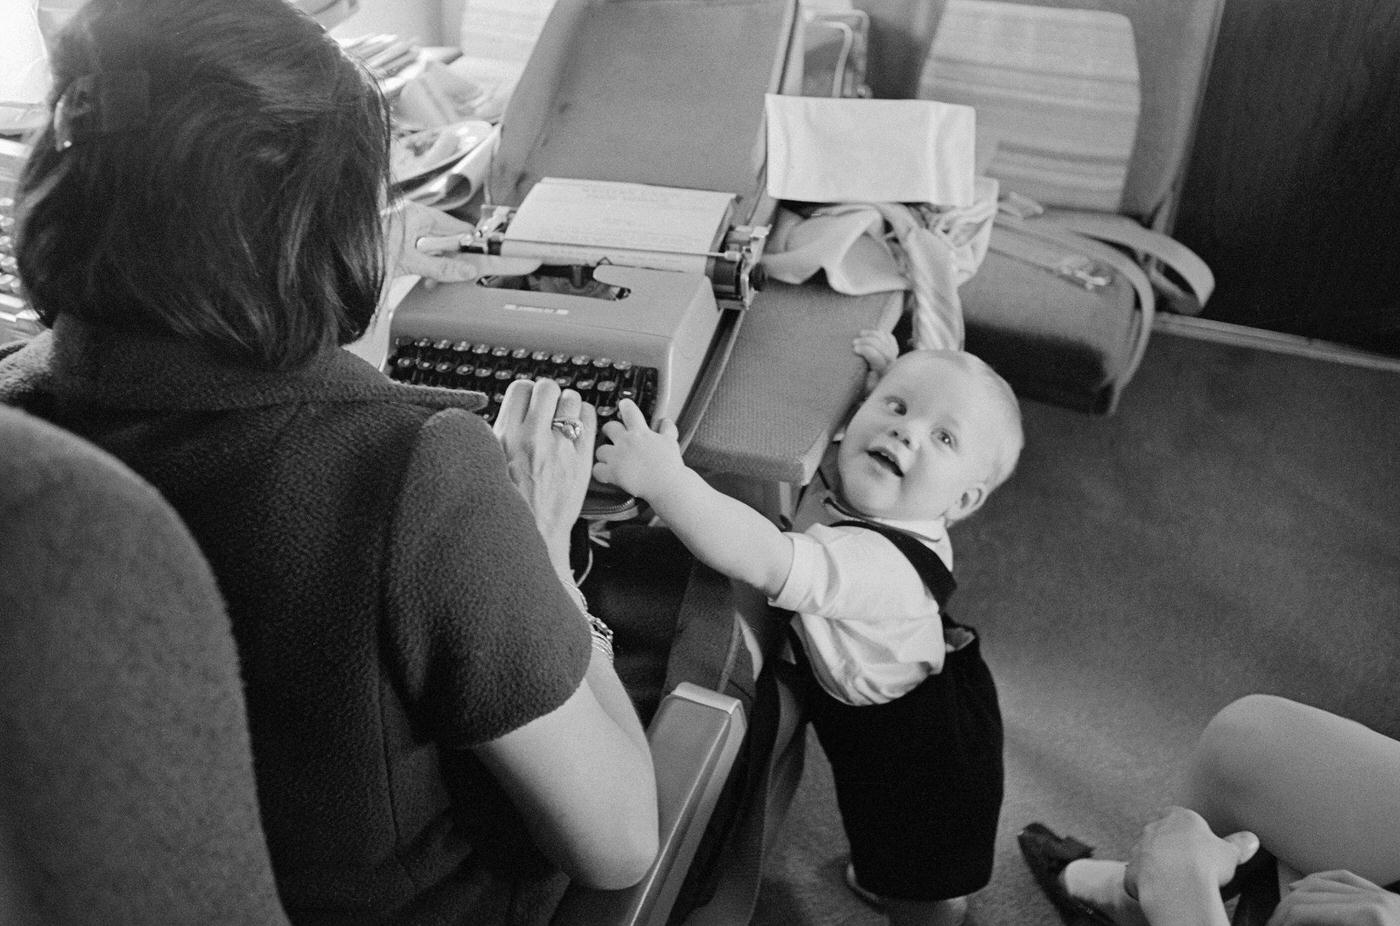 President Lyndon Johnson's grandson, Patrick Lyndon, typing on a typewriter with journalist Helen Thomas on Air Force One during a flight to New York City in the 1960s.